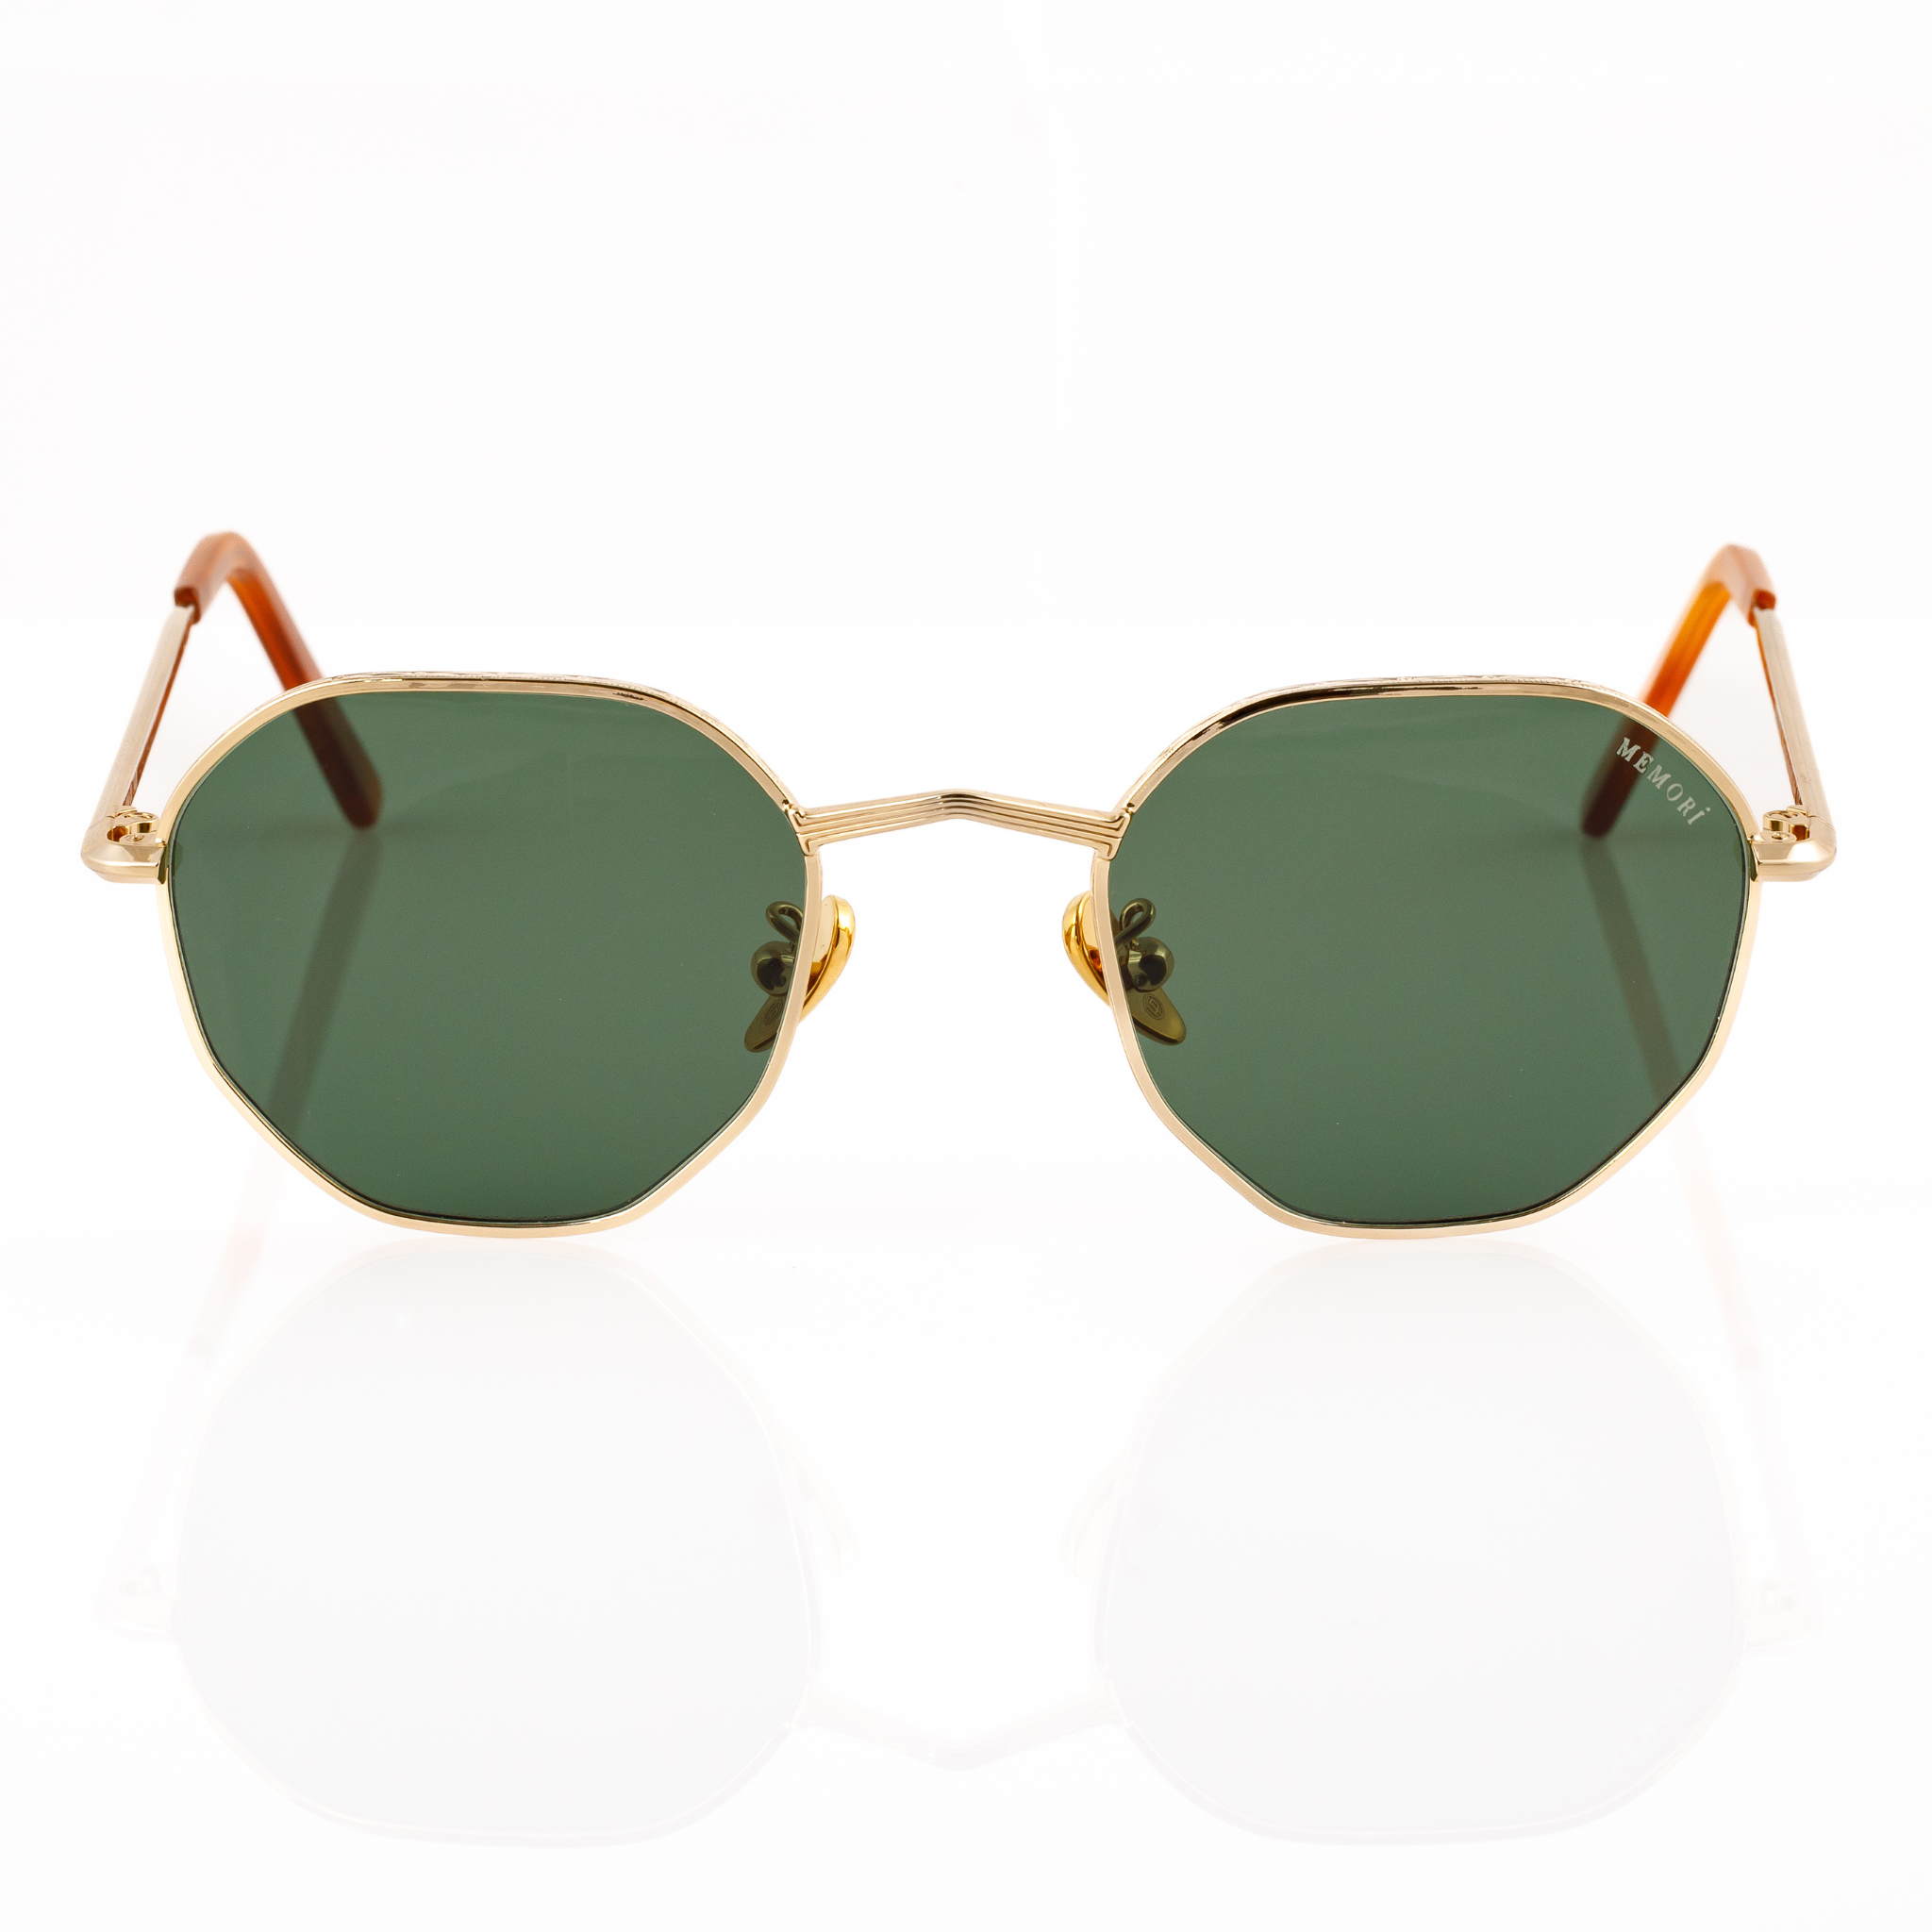 Best gold metal hexagon sunglasses for small faces for men or women. Features V nose bridge and green lenses. Front view. 